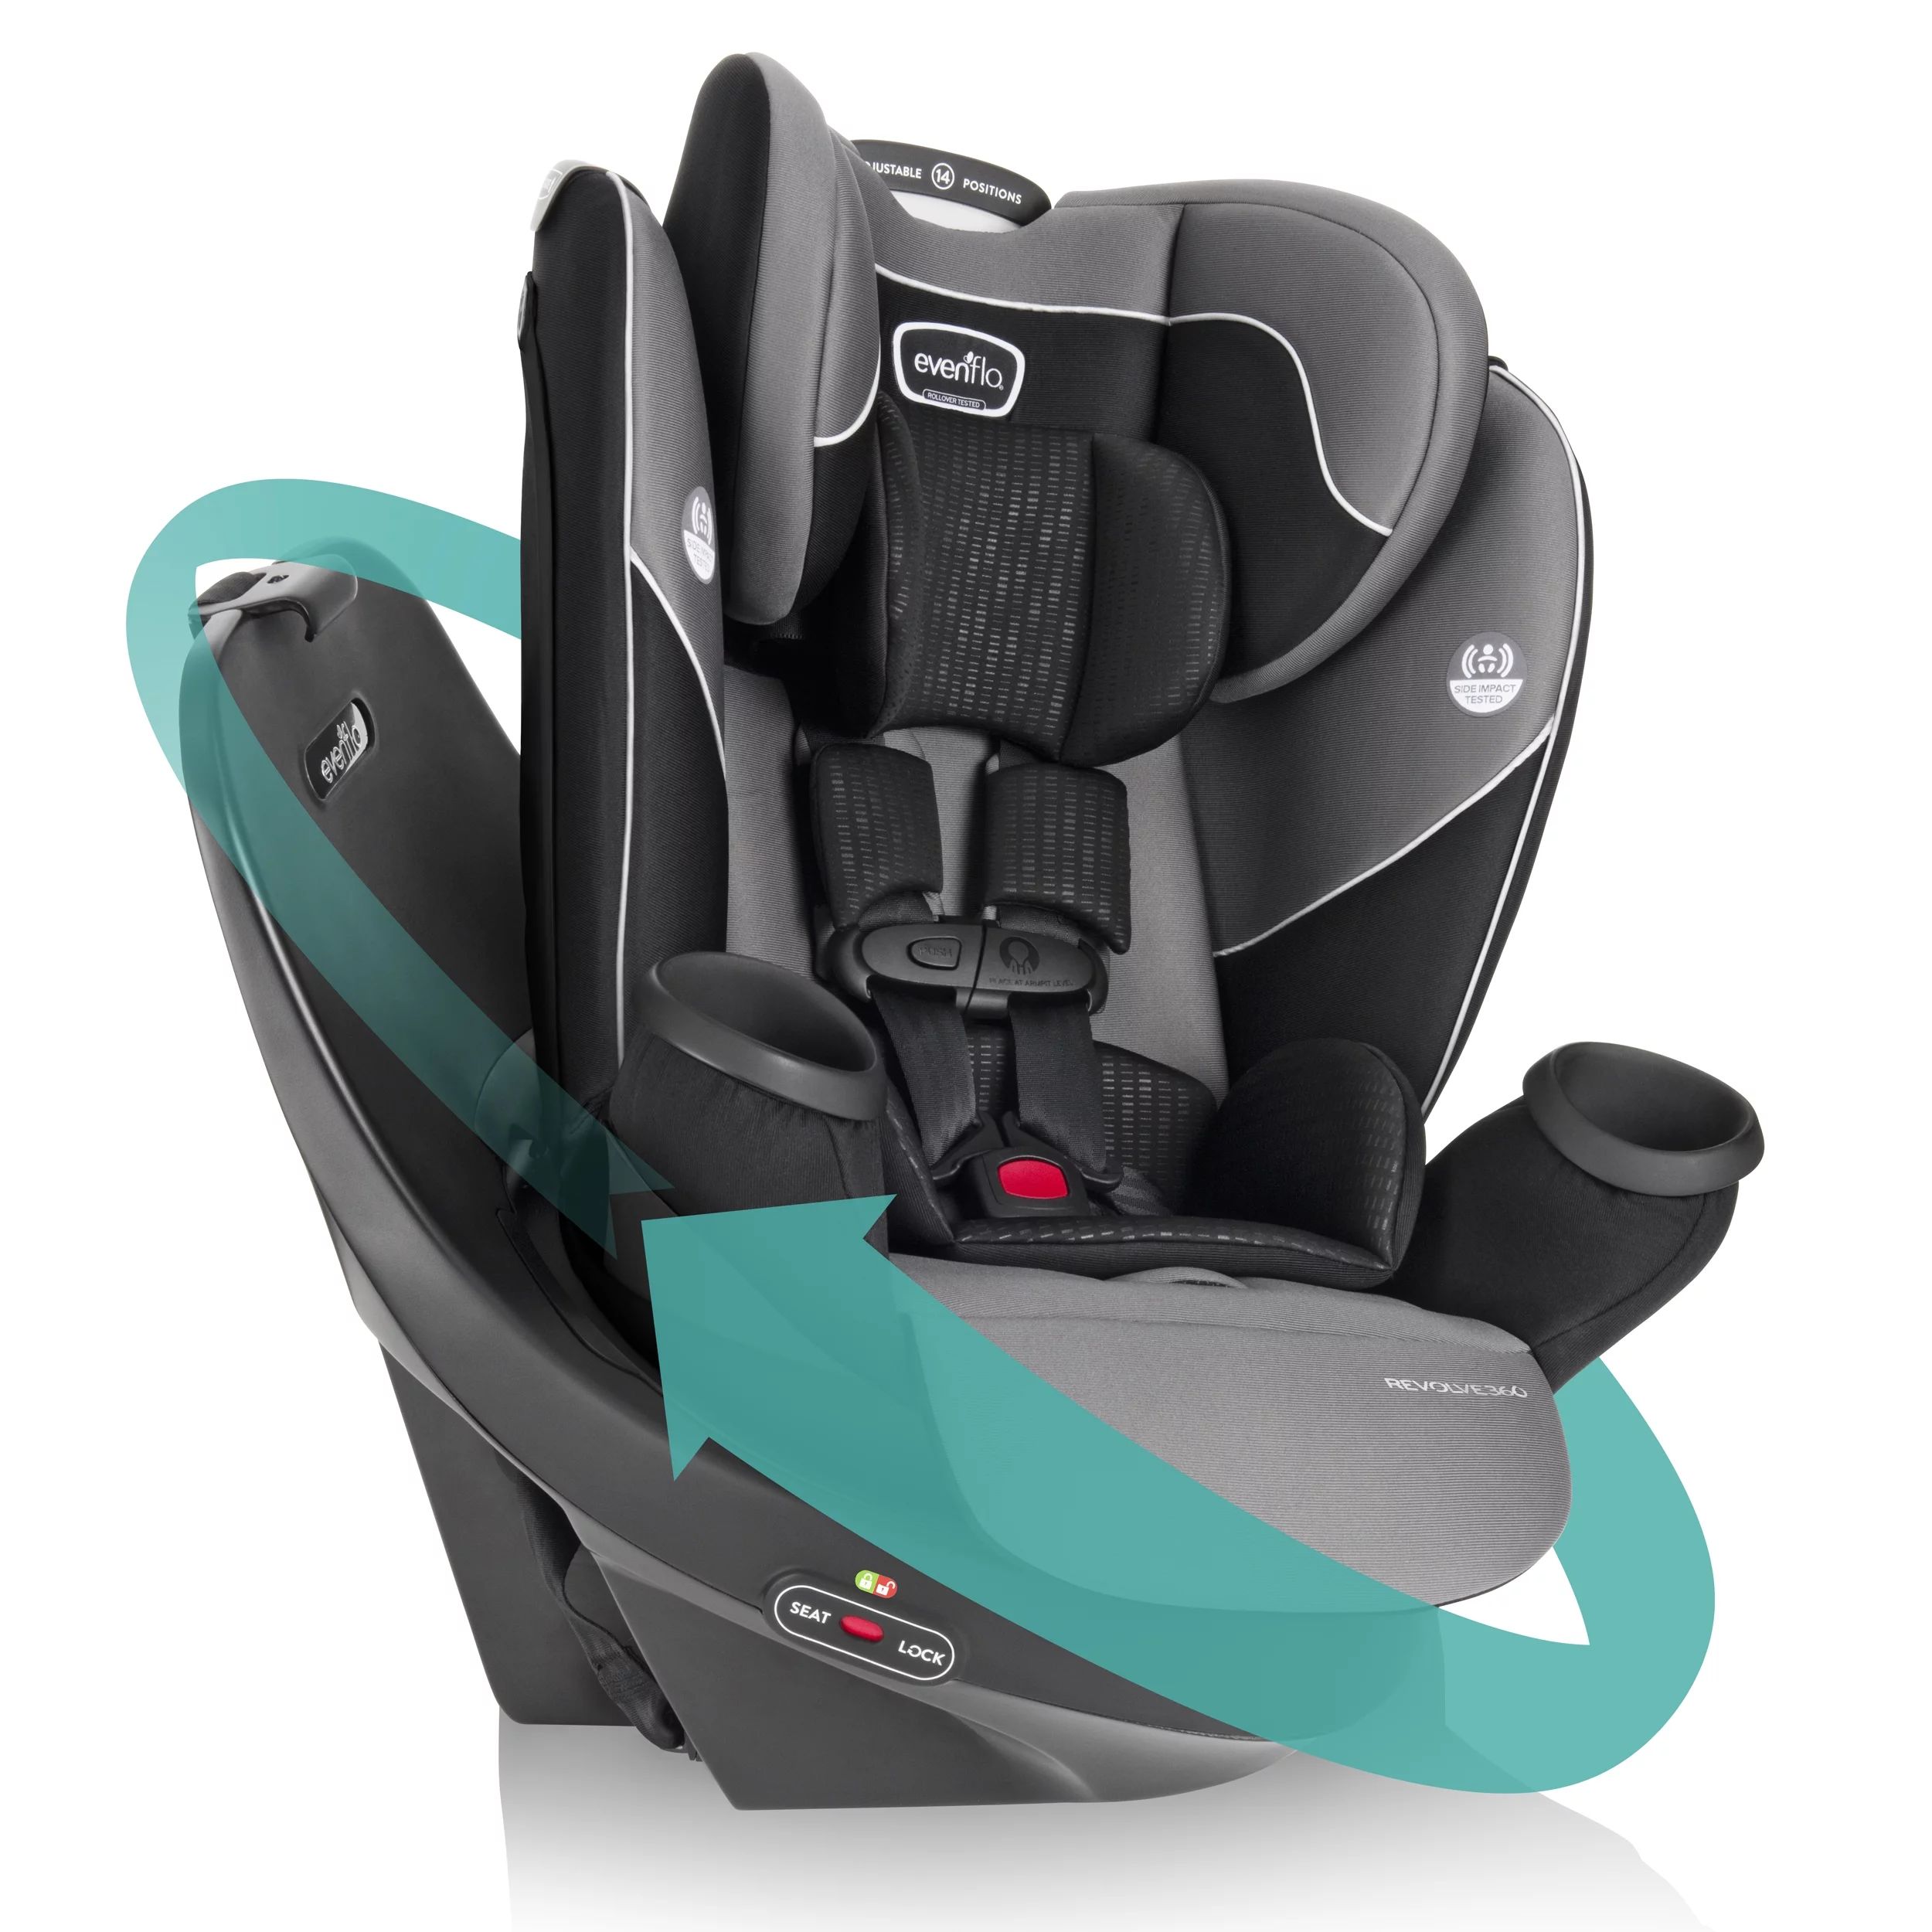 Evenflo Revolve360 Rotational All-in-One Convertible Car Seat, Amherst Gray | Walmart (US)